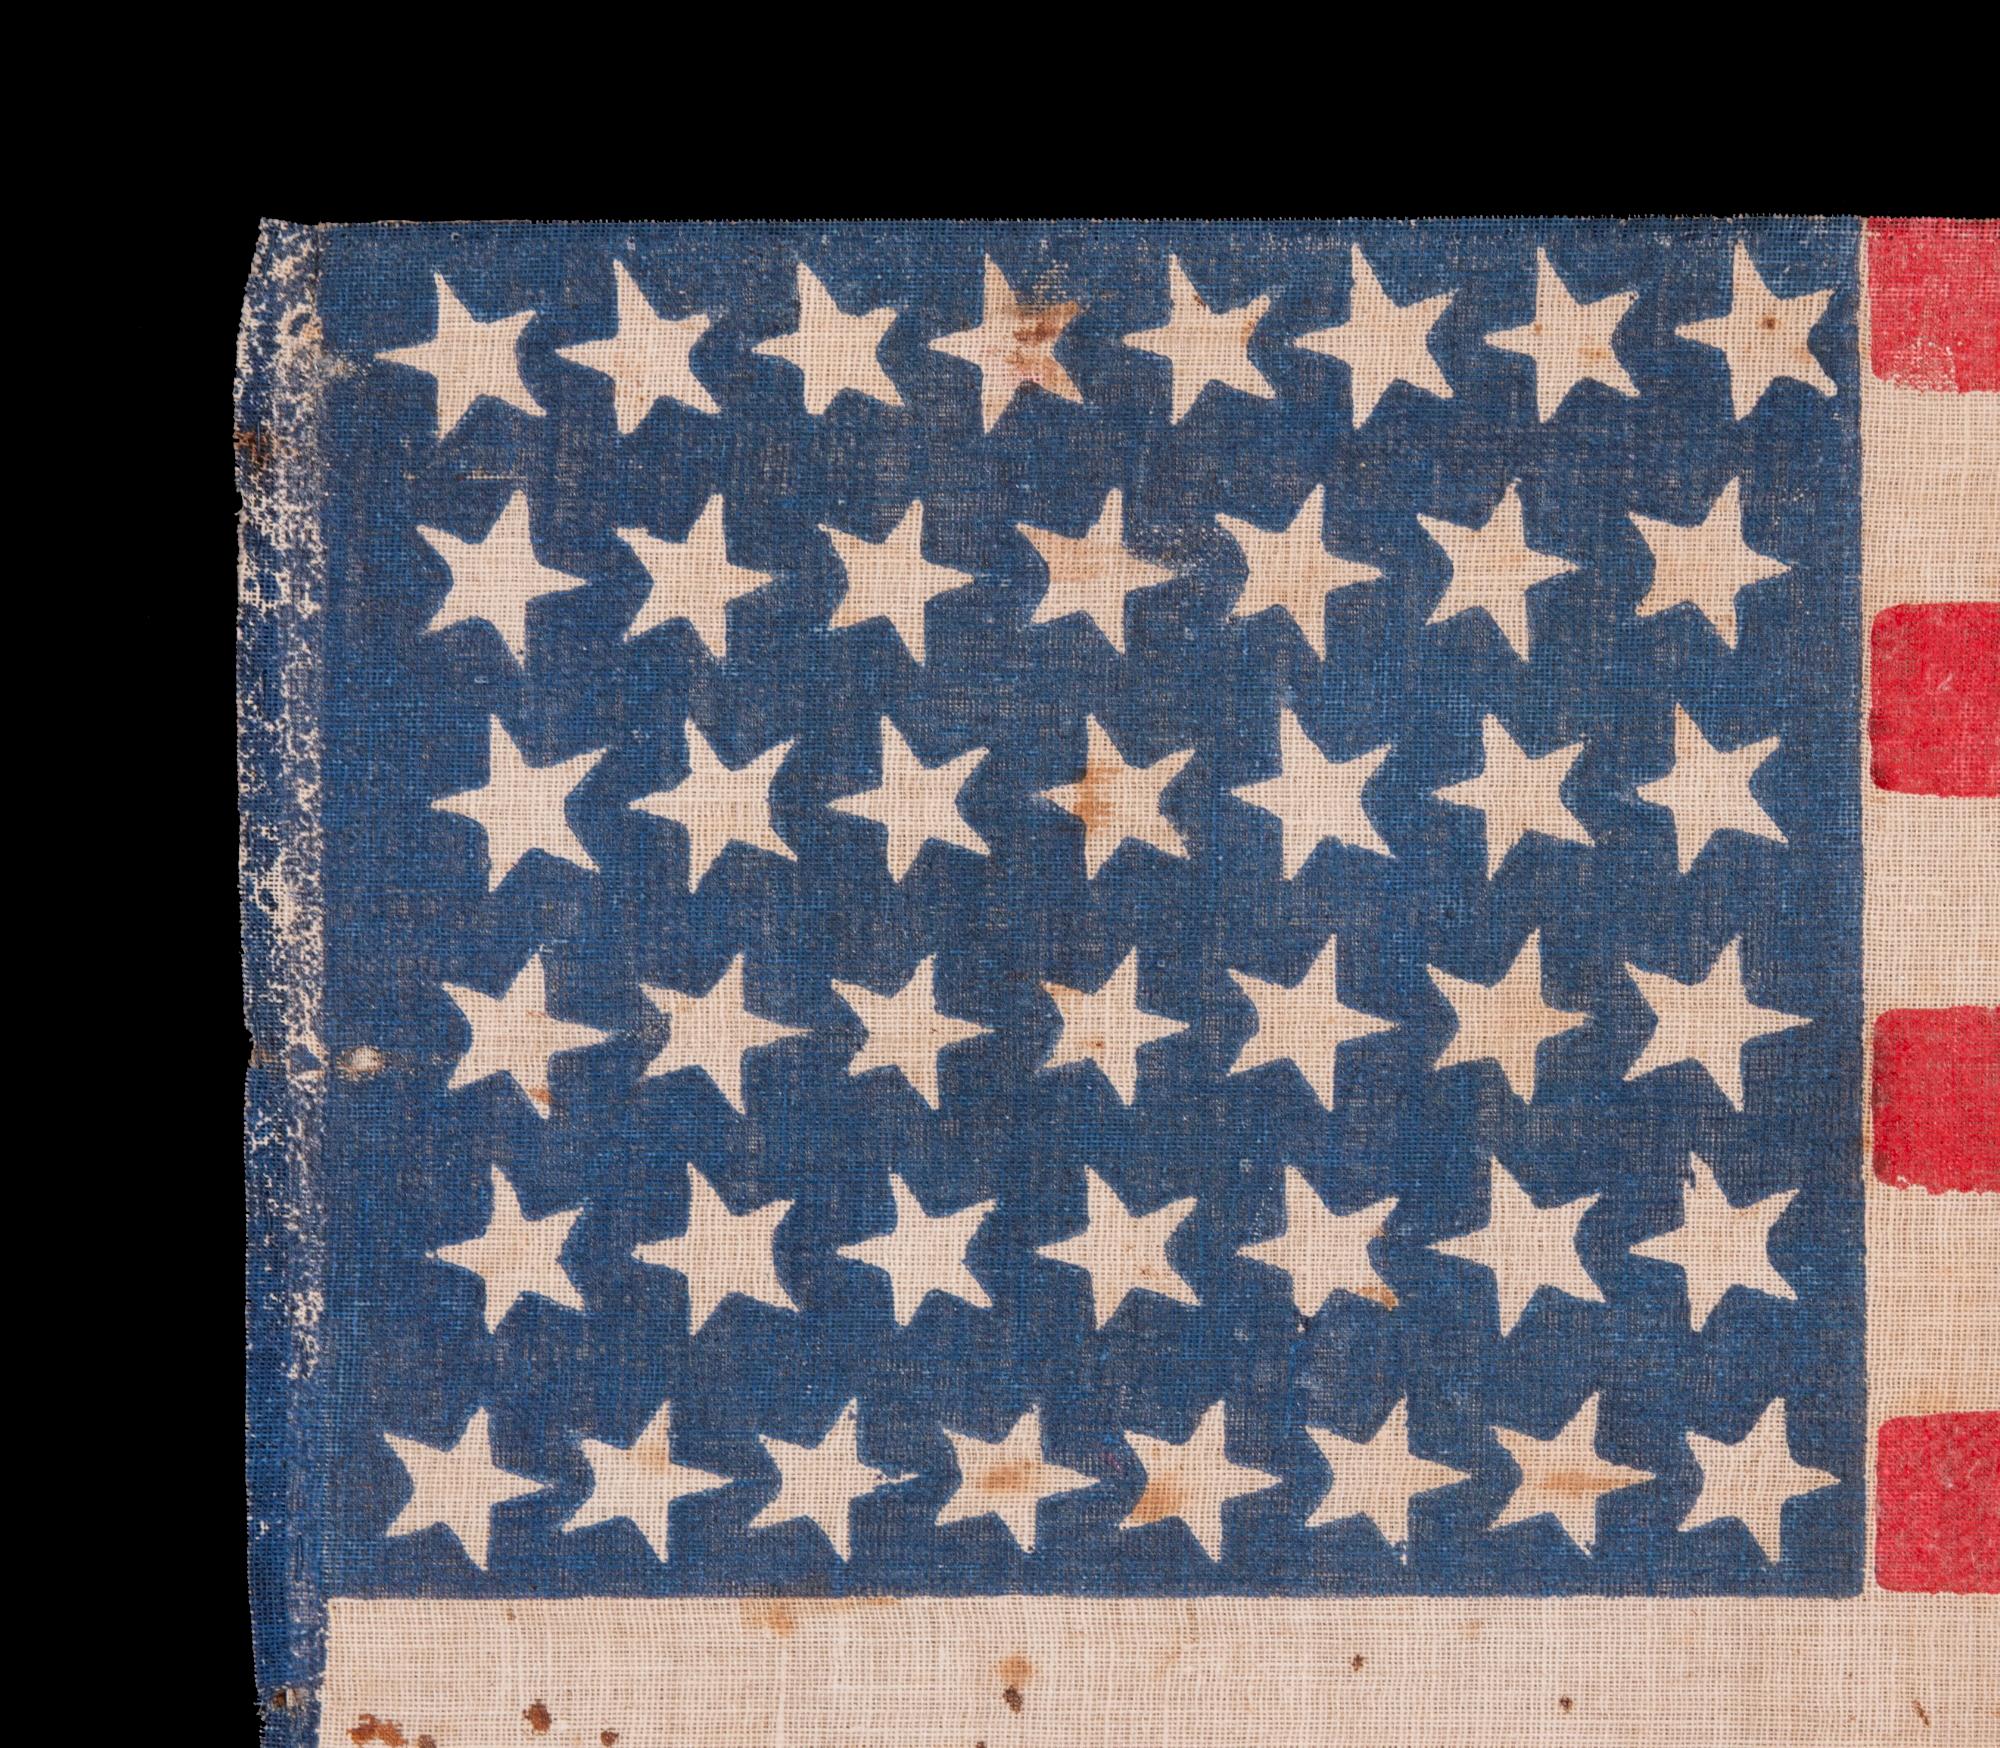 American 44 Star Antique Parade Flag, Hourglass Formation, Wyoming Statehood ca 1890-1896 For Sale